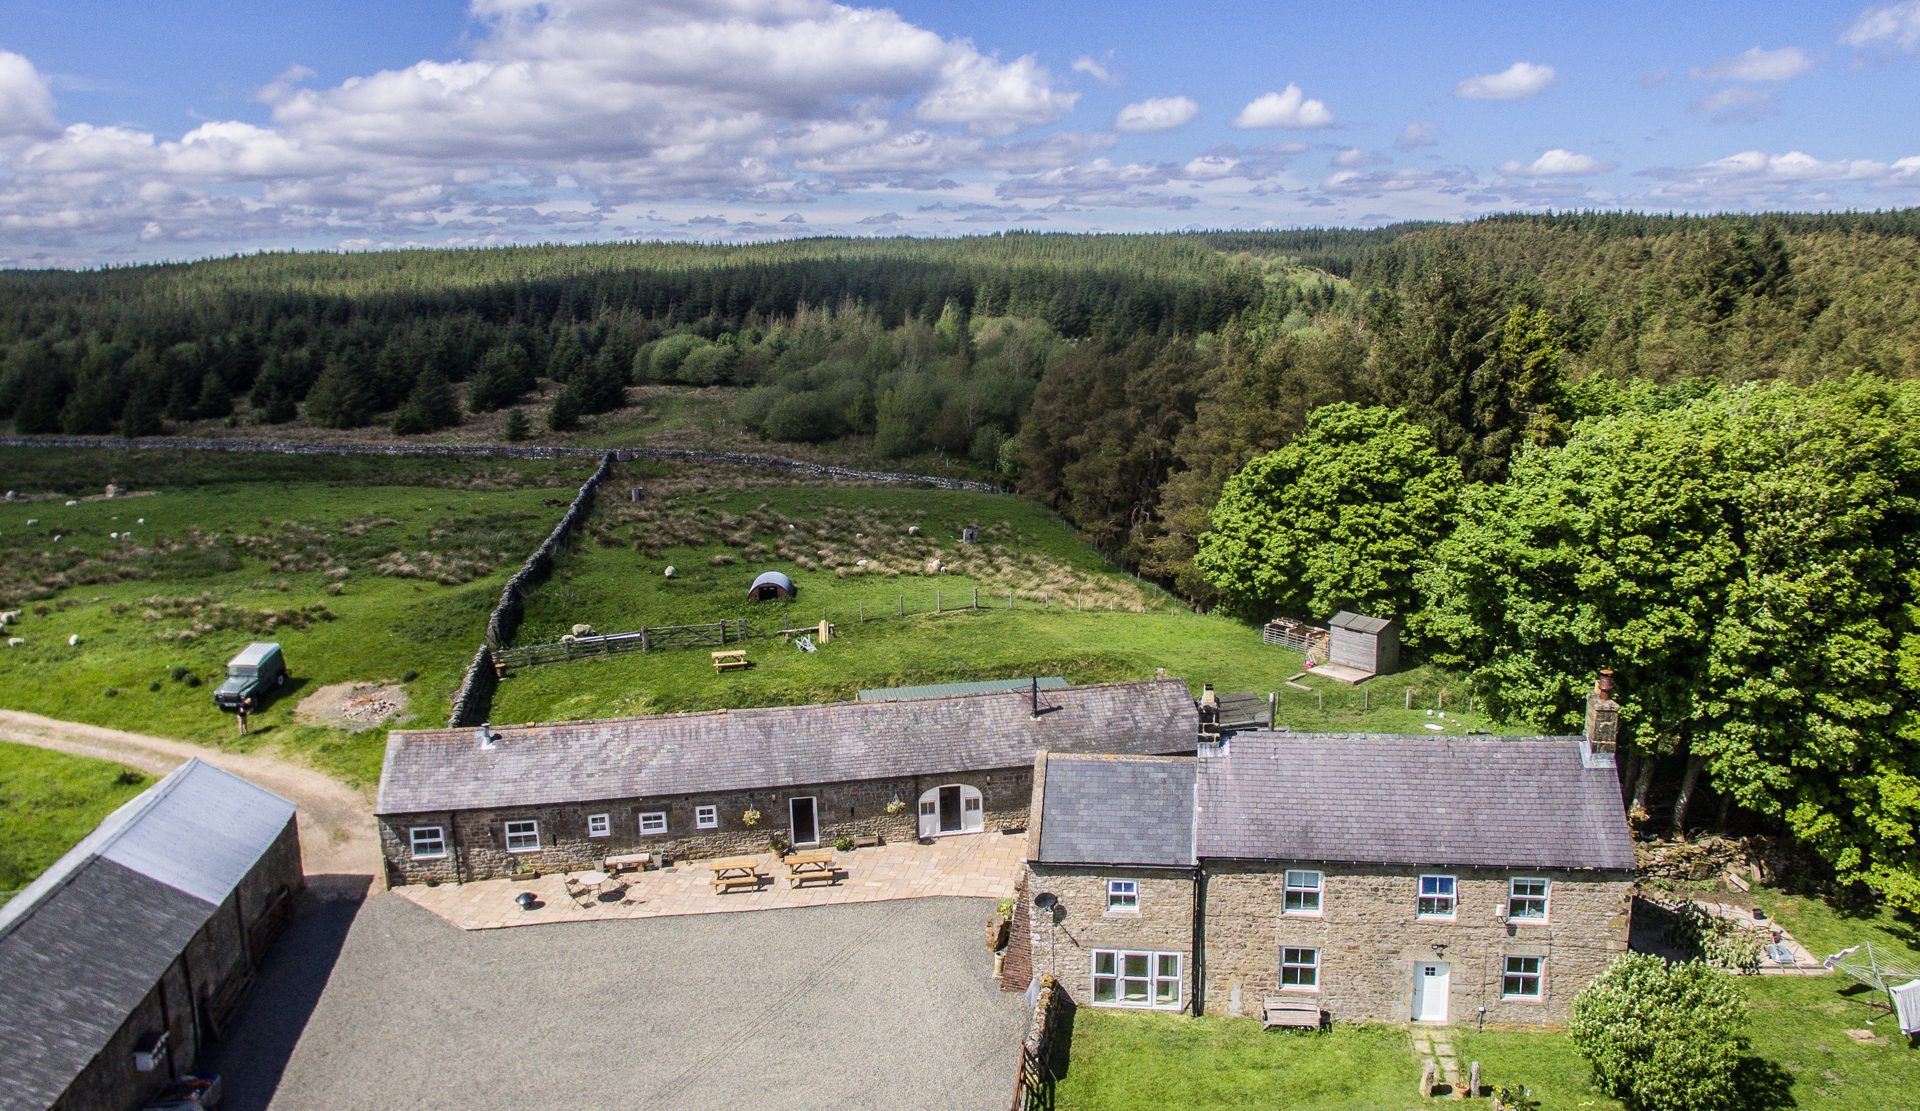 An ariel shot of LoughView Bunkhouse looking gorgeous and welcoming on hadrian's wall